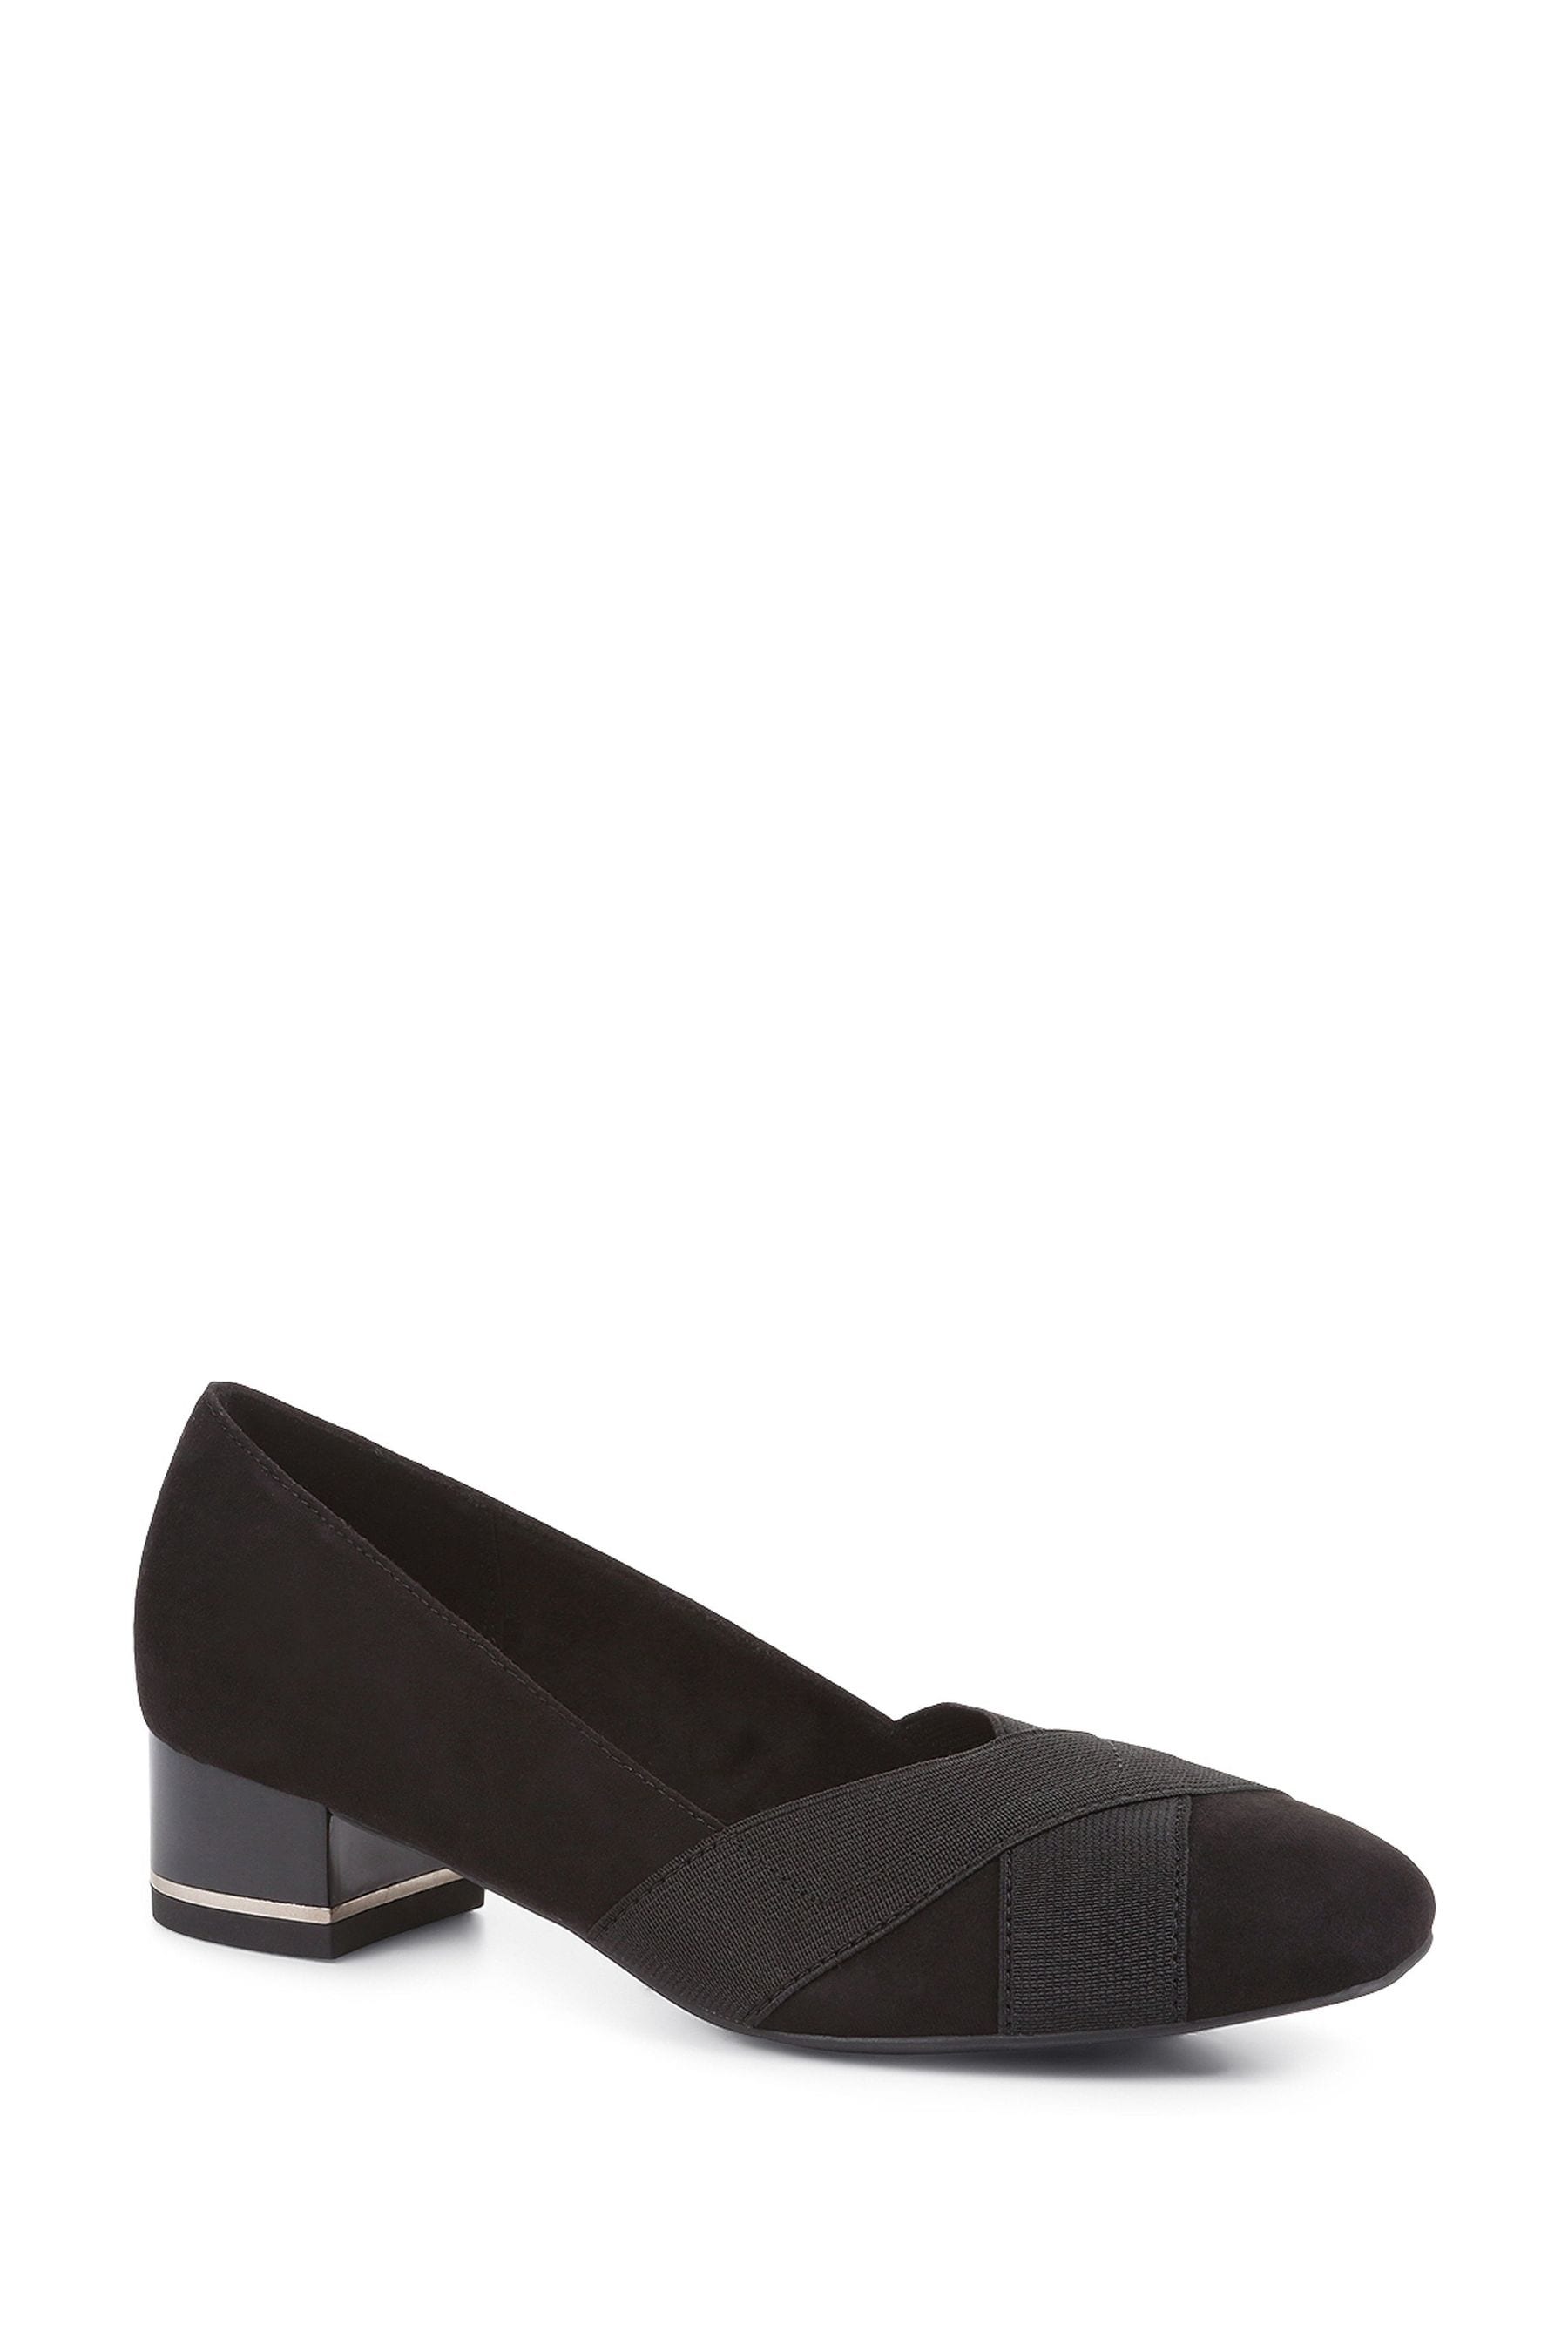 Buy Pavers Block Heel Court Black Shoes from Next Oman